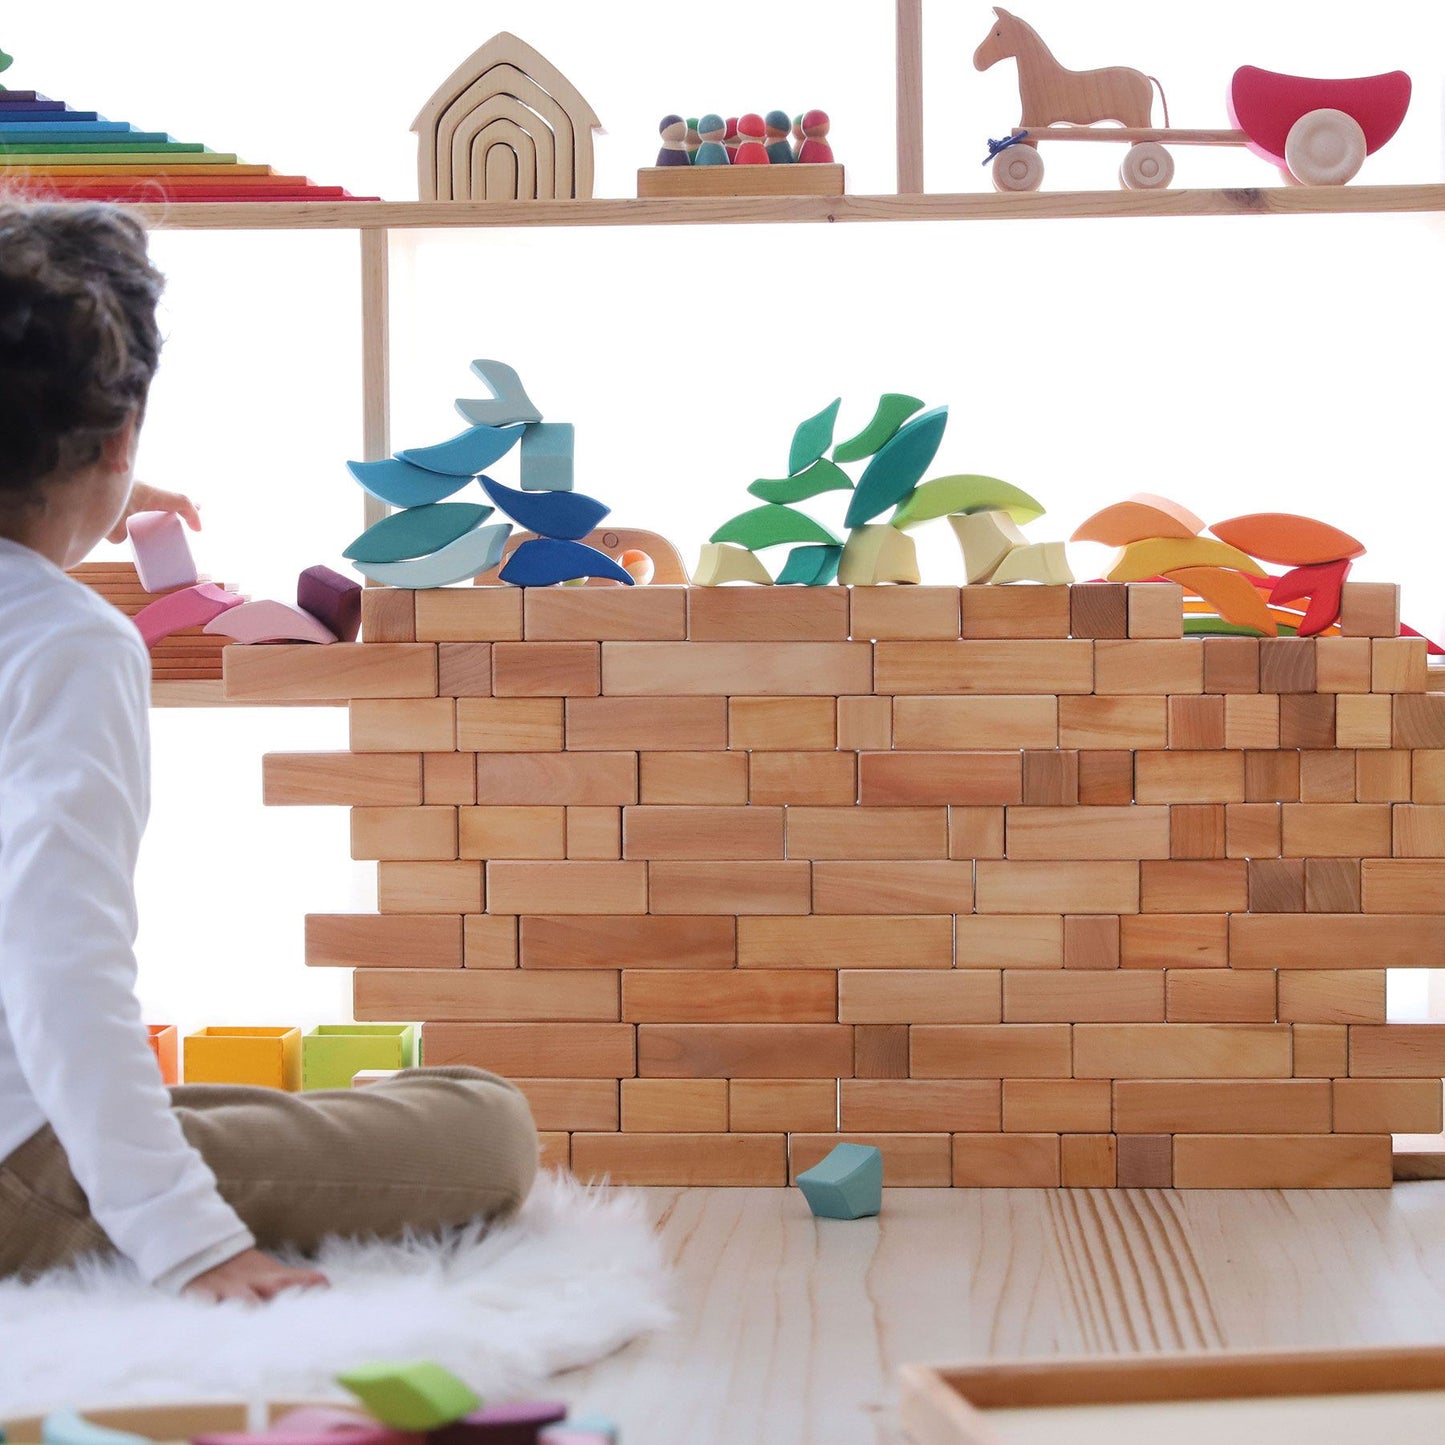 Lara | Building Set | Wooden Toys for Kids | Open-Ended Play